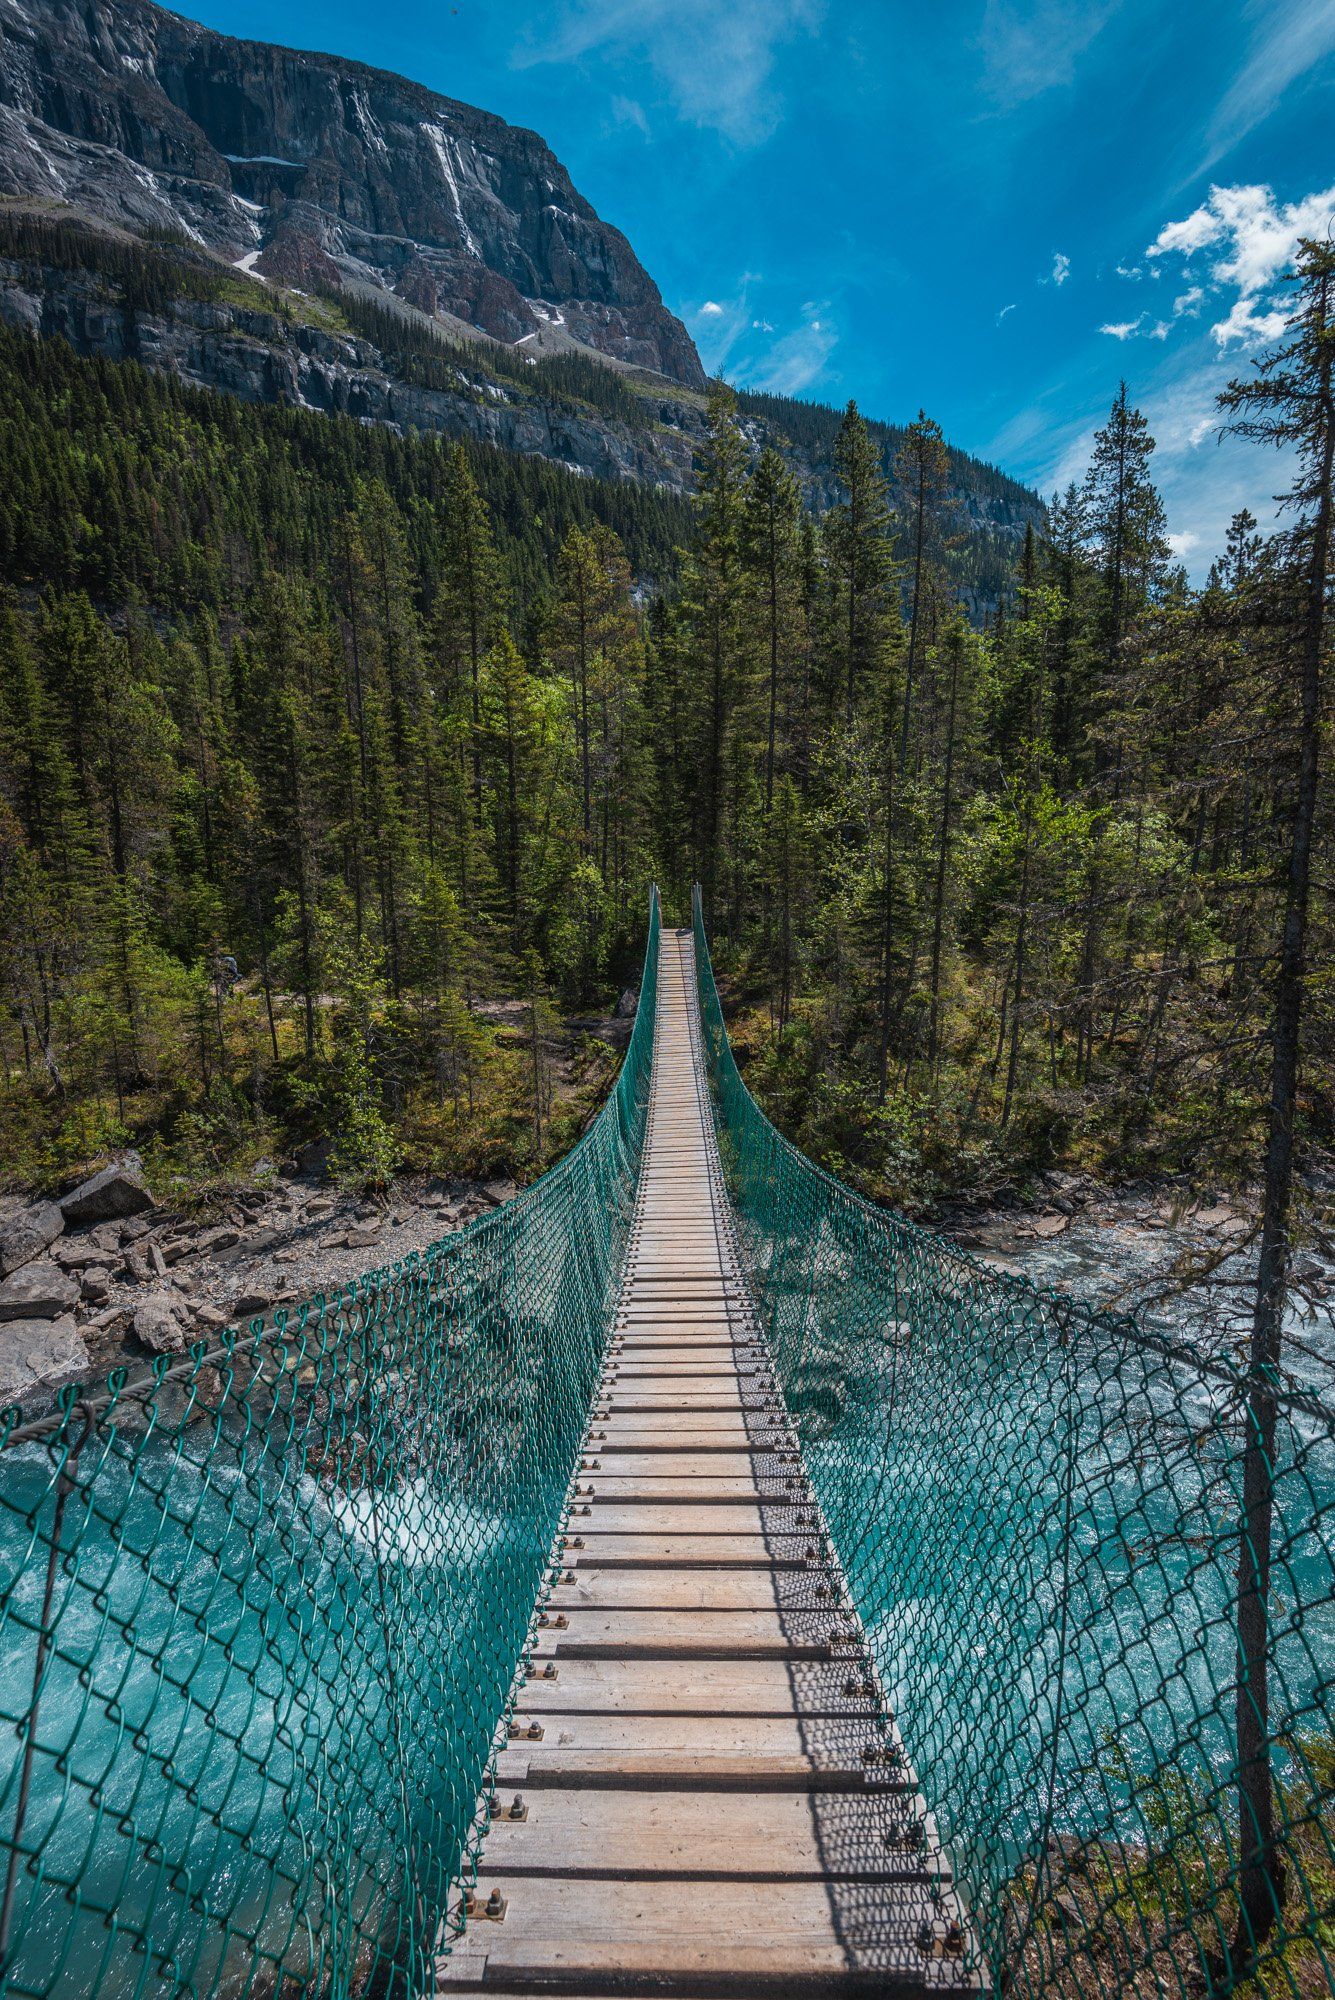 Bridge near the Whitehorn camp, mt Robson park, BC, Canada. Turquoise lake and mountains touched with first rays of morning sun